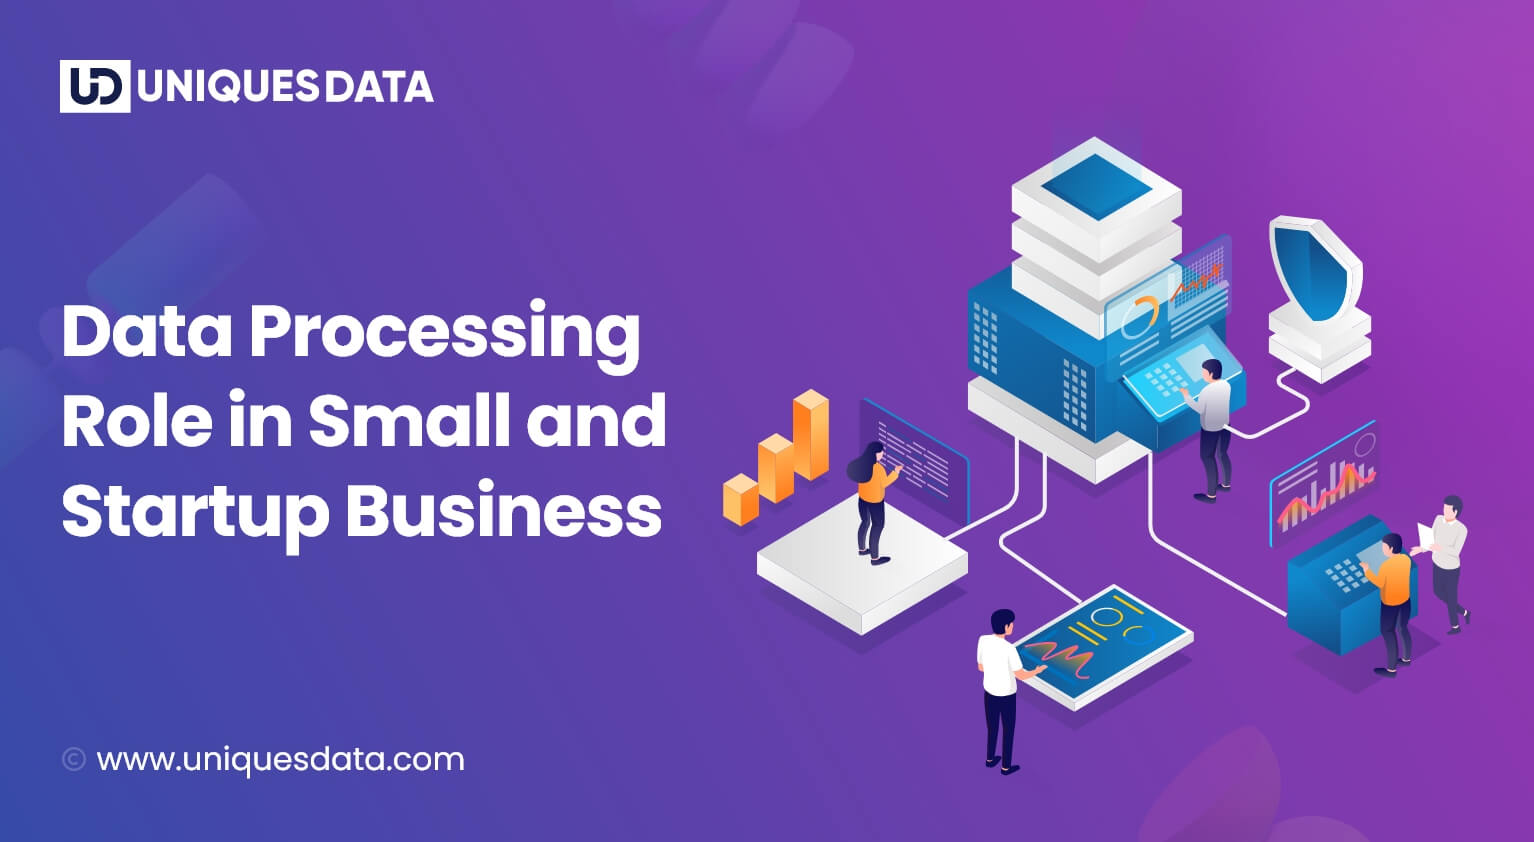 Data Processing Role in Small and Startup Business